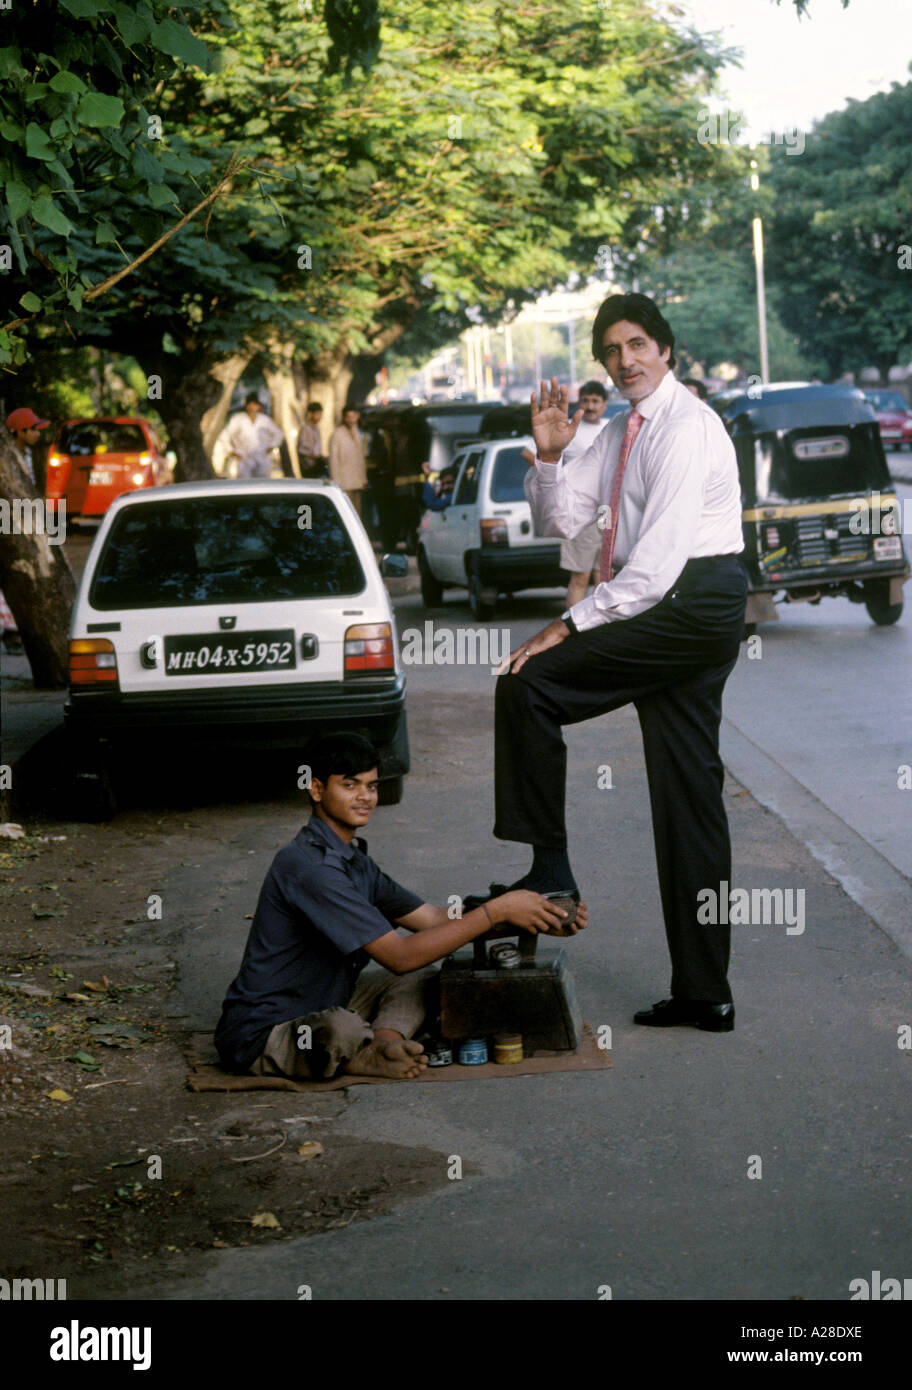 Indian Bollywood Film Star Actor Amitabh Bachchan getting shoe polished on the streets of Mumbai India Stock Photo